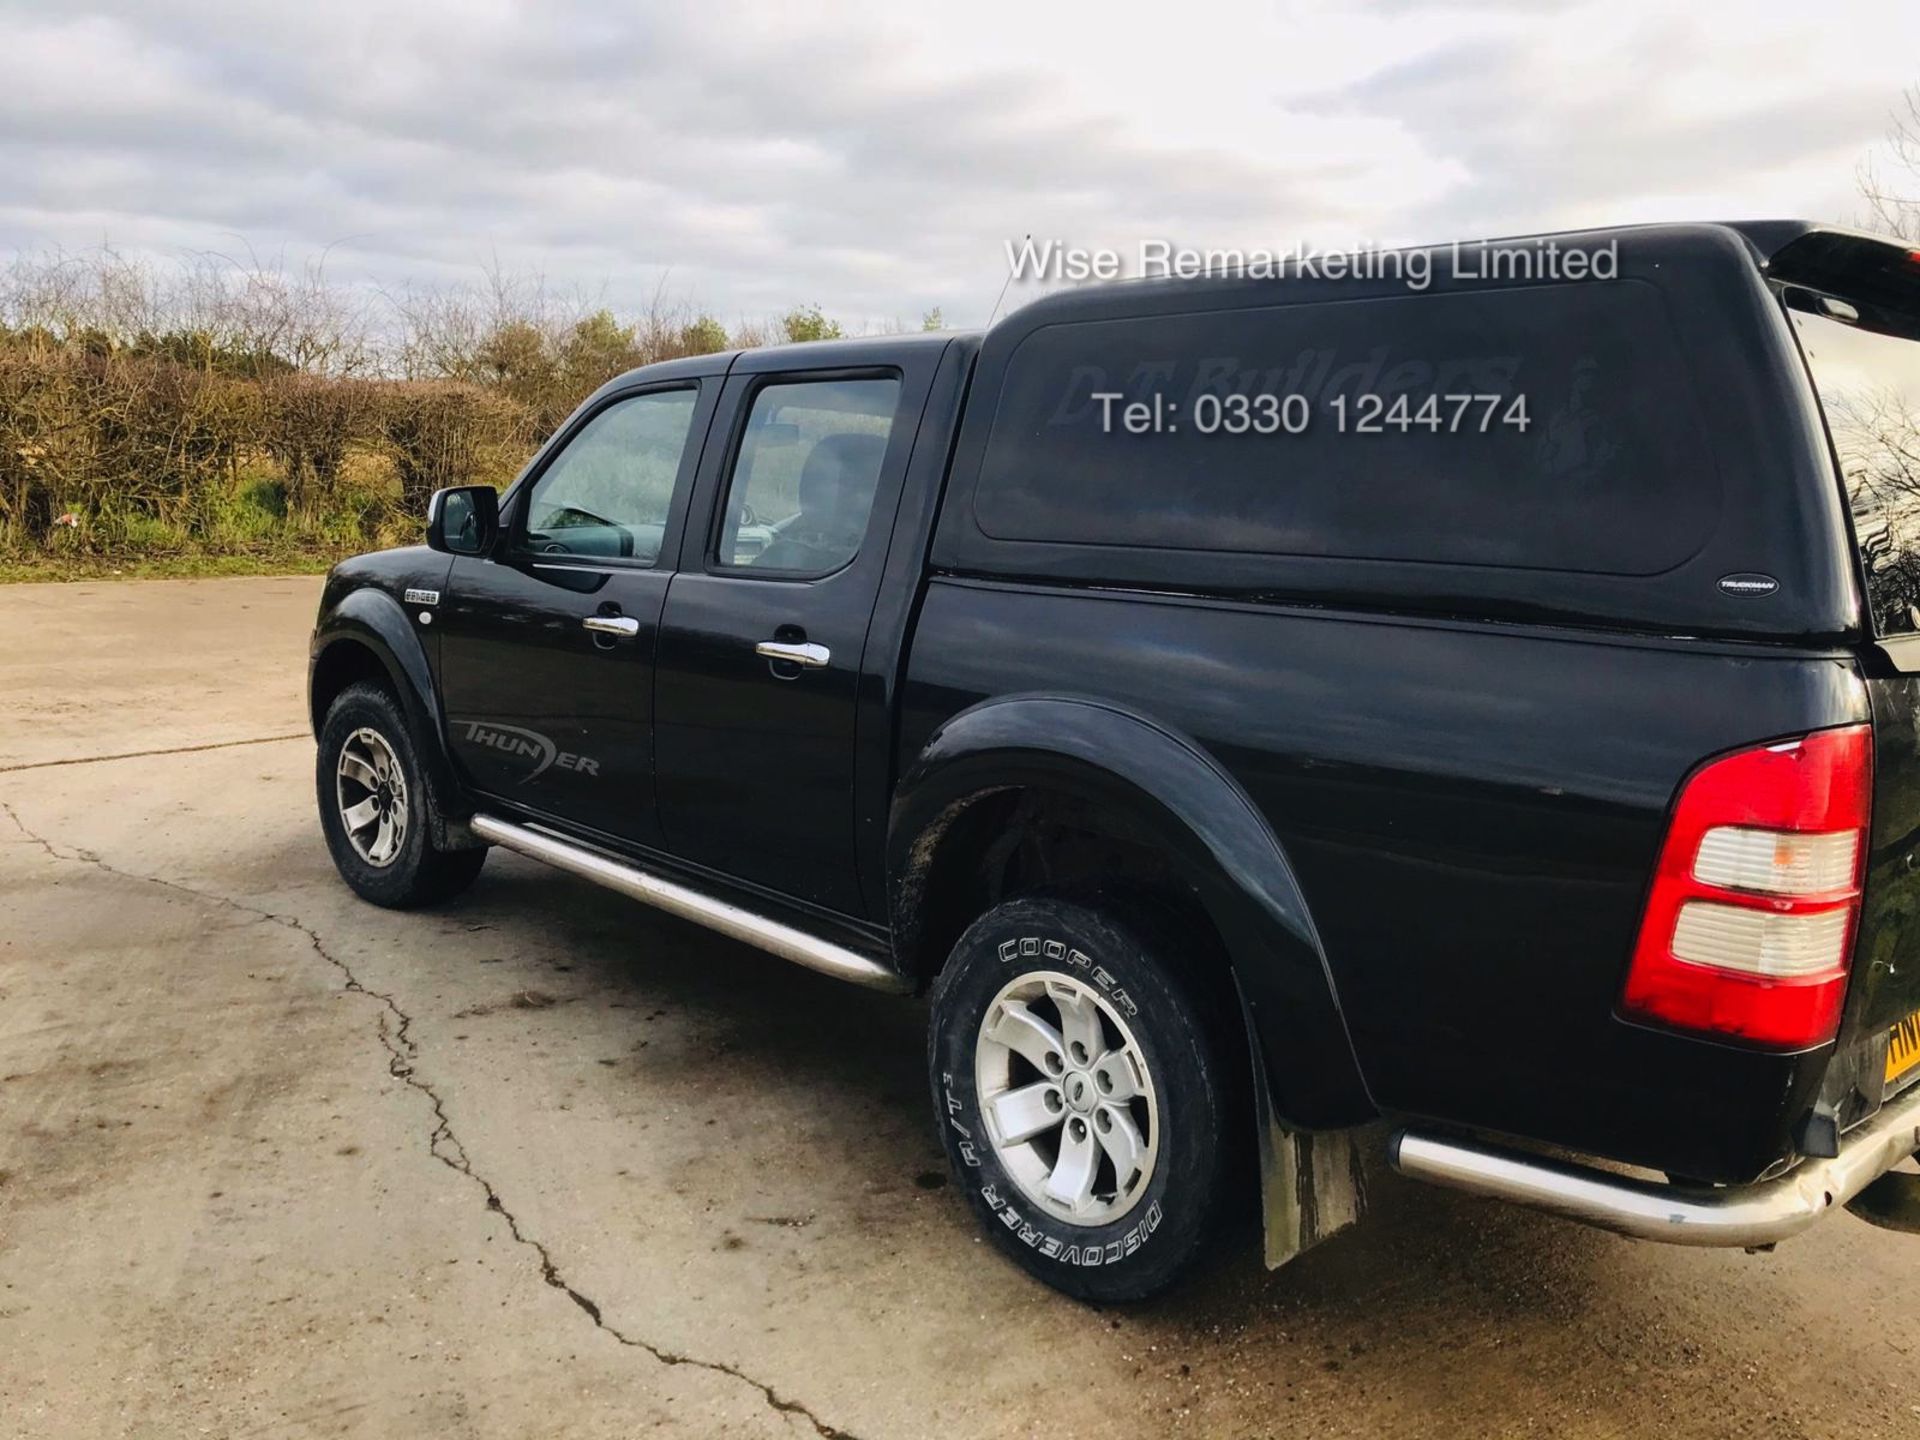 Ford Ranger Thunder 2.5 Double Cab Pick Up - 2009 09 Reg - 4x4 - Service History - Full Leather - Image 2 of 17